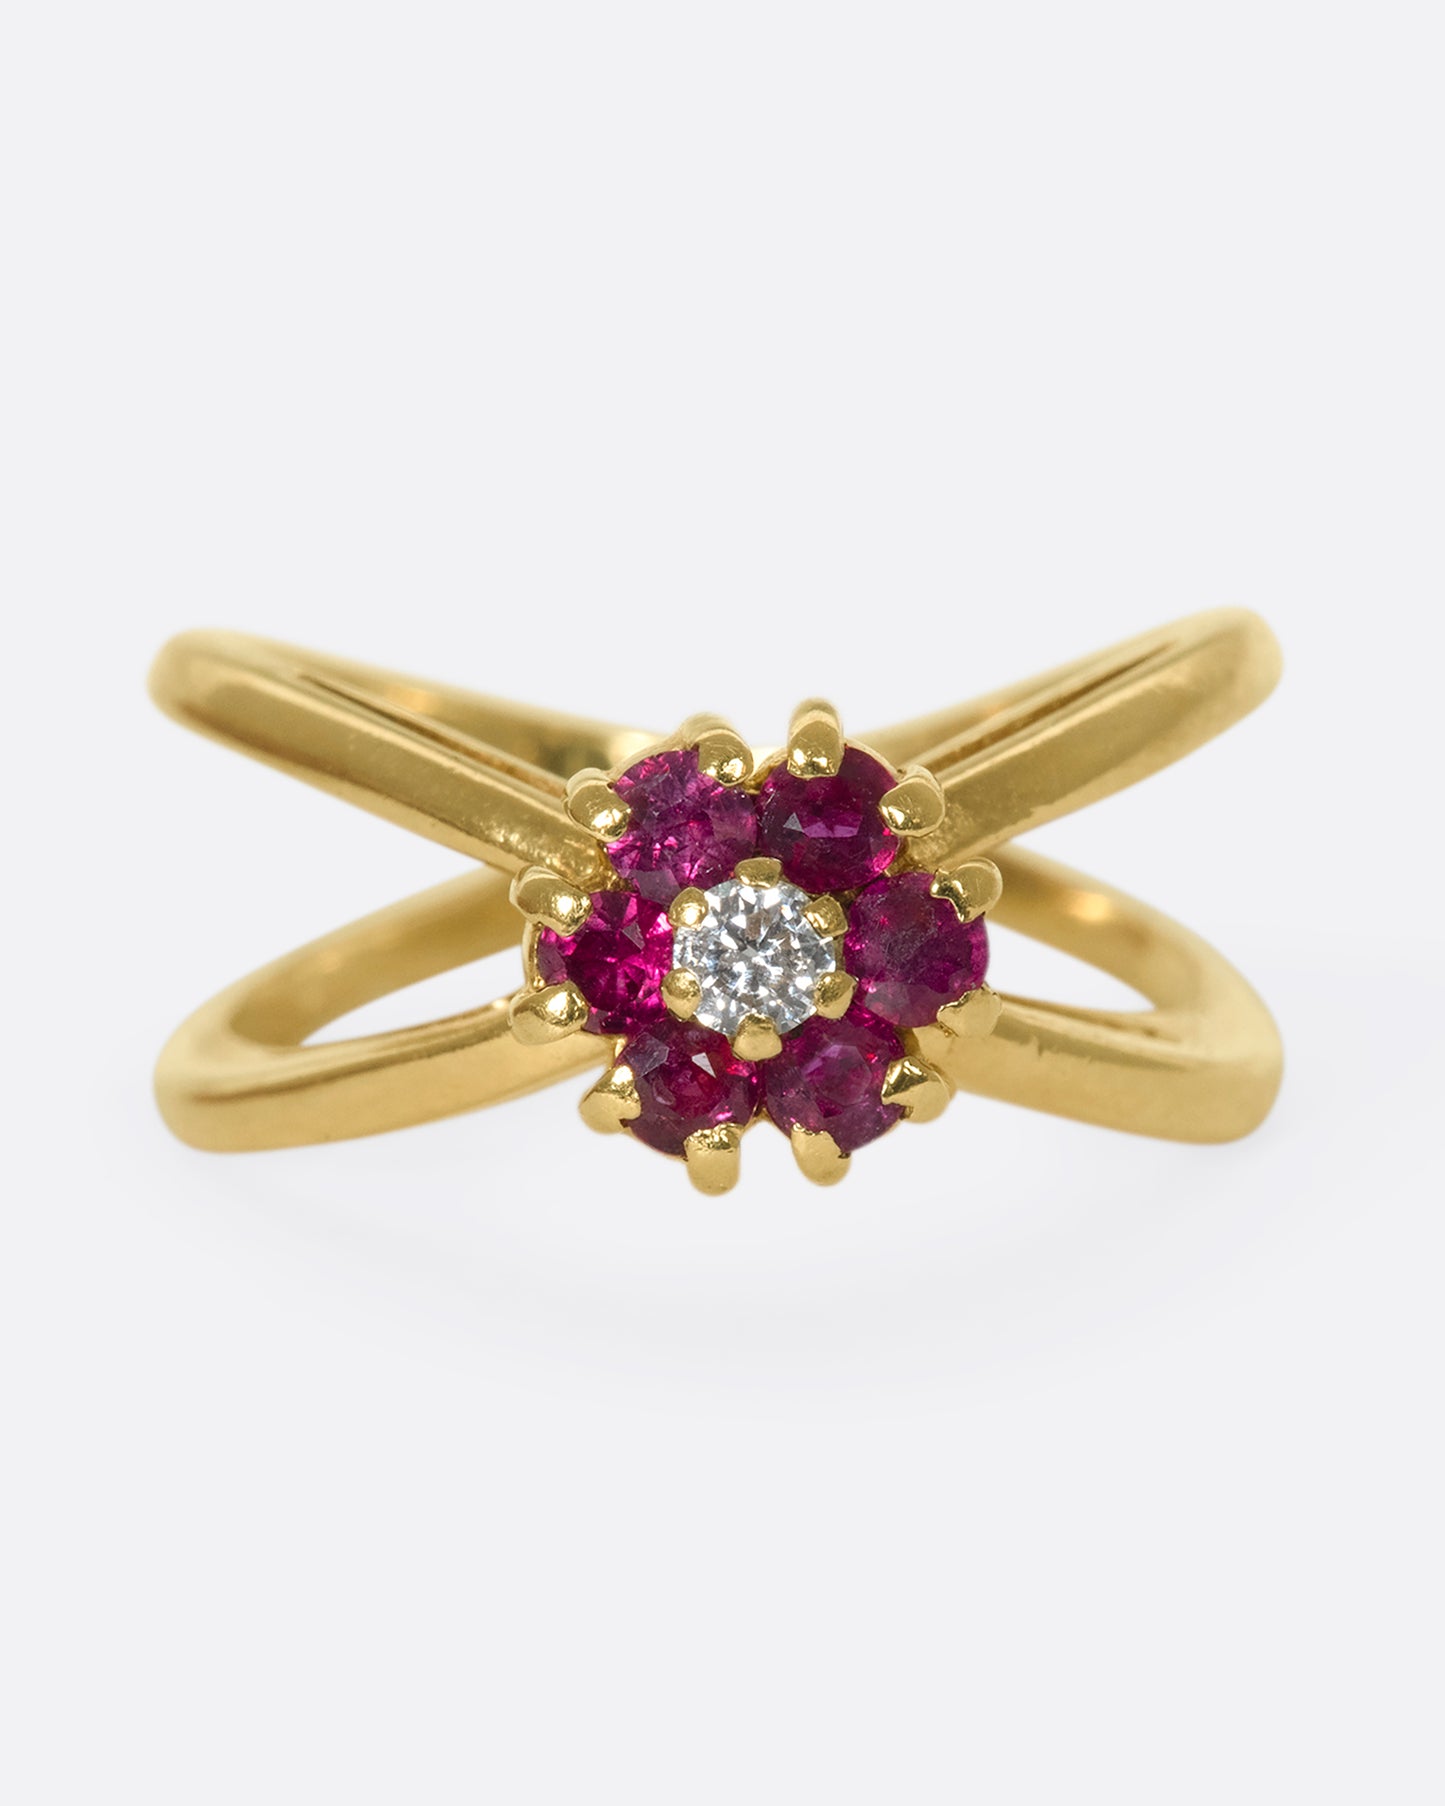 A forward view of a yellow gold double banded ring with a ruby and diamond flower in the center.